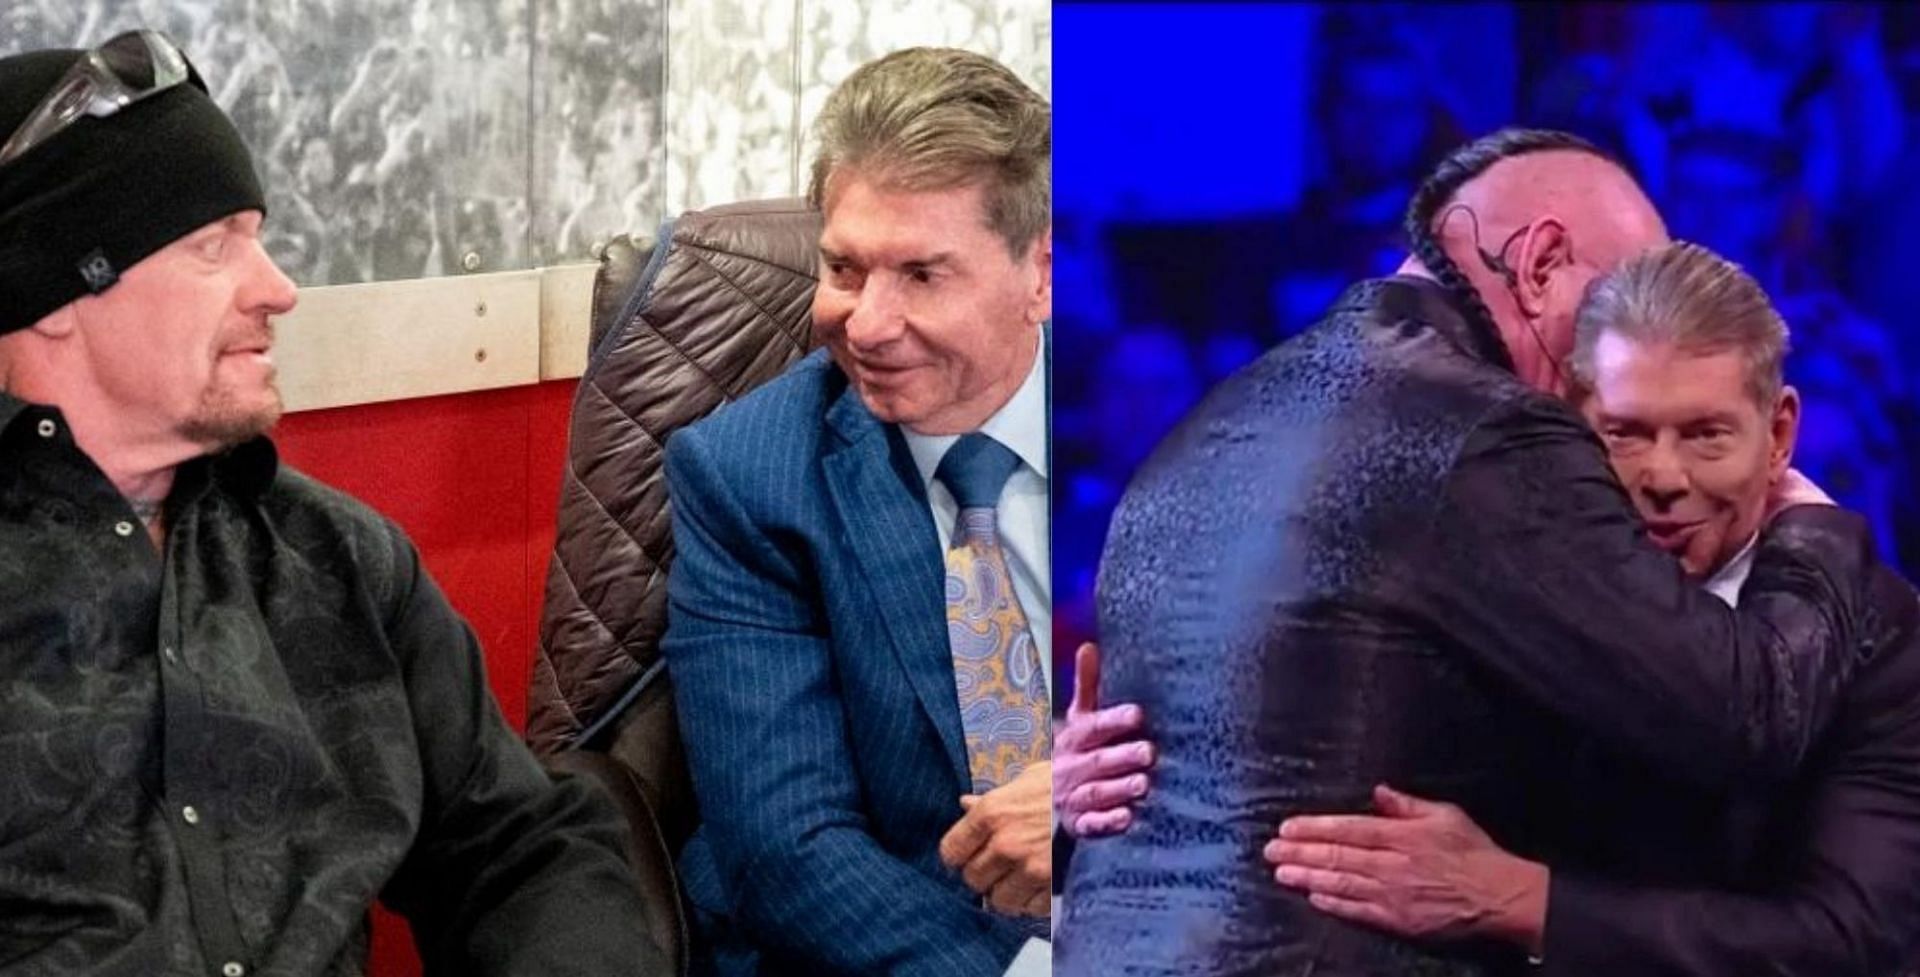 The Undertaker and Vince McMahon have a close relationship